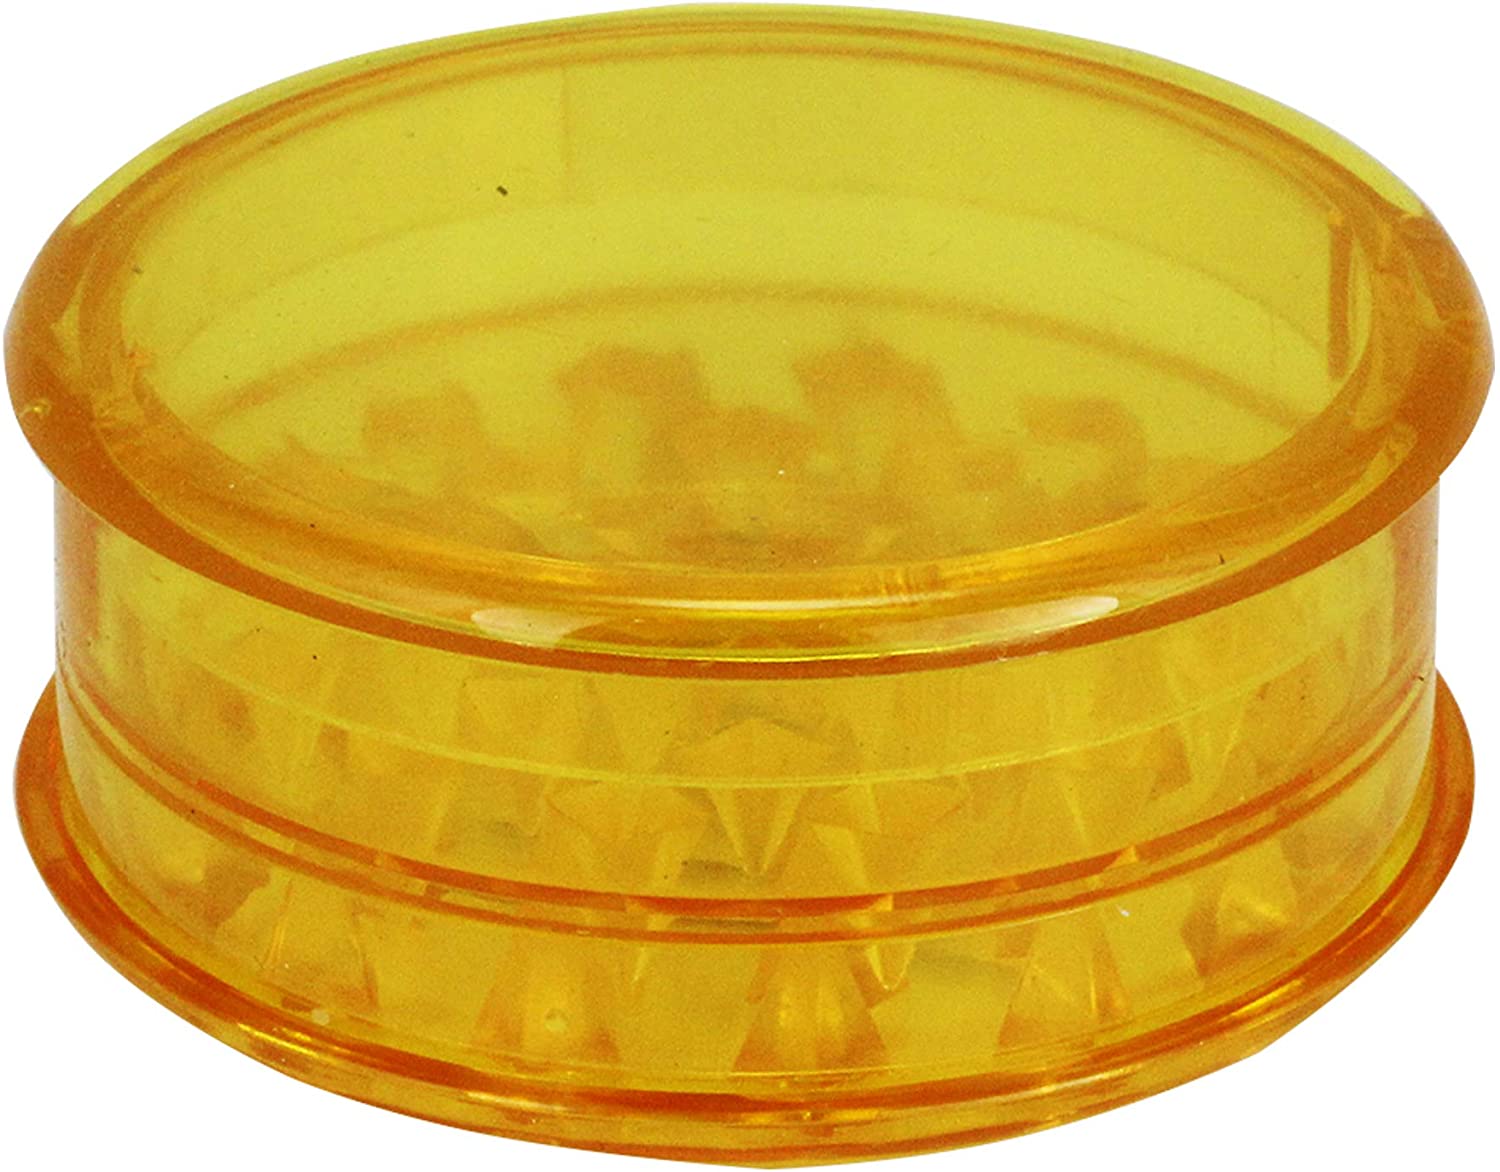 Spliff 1 x Grinder Plastic 60 mm for Tobacco and Herb Three Parts Including Storage Choose Your Favourite Colour (Yellow)